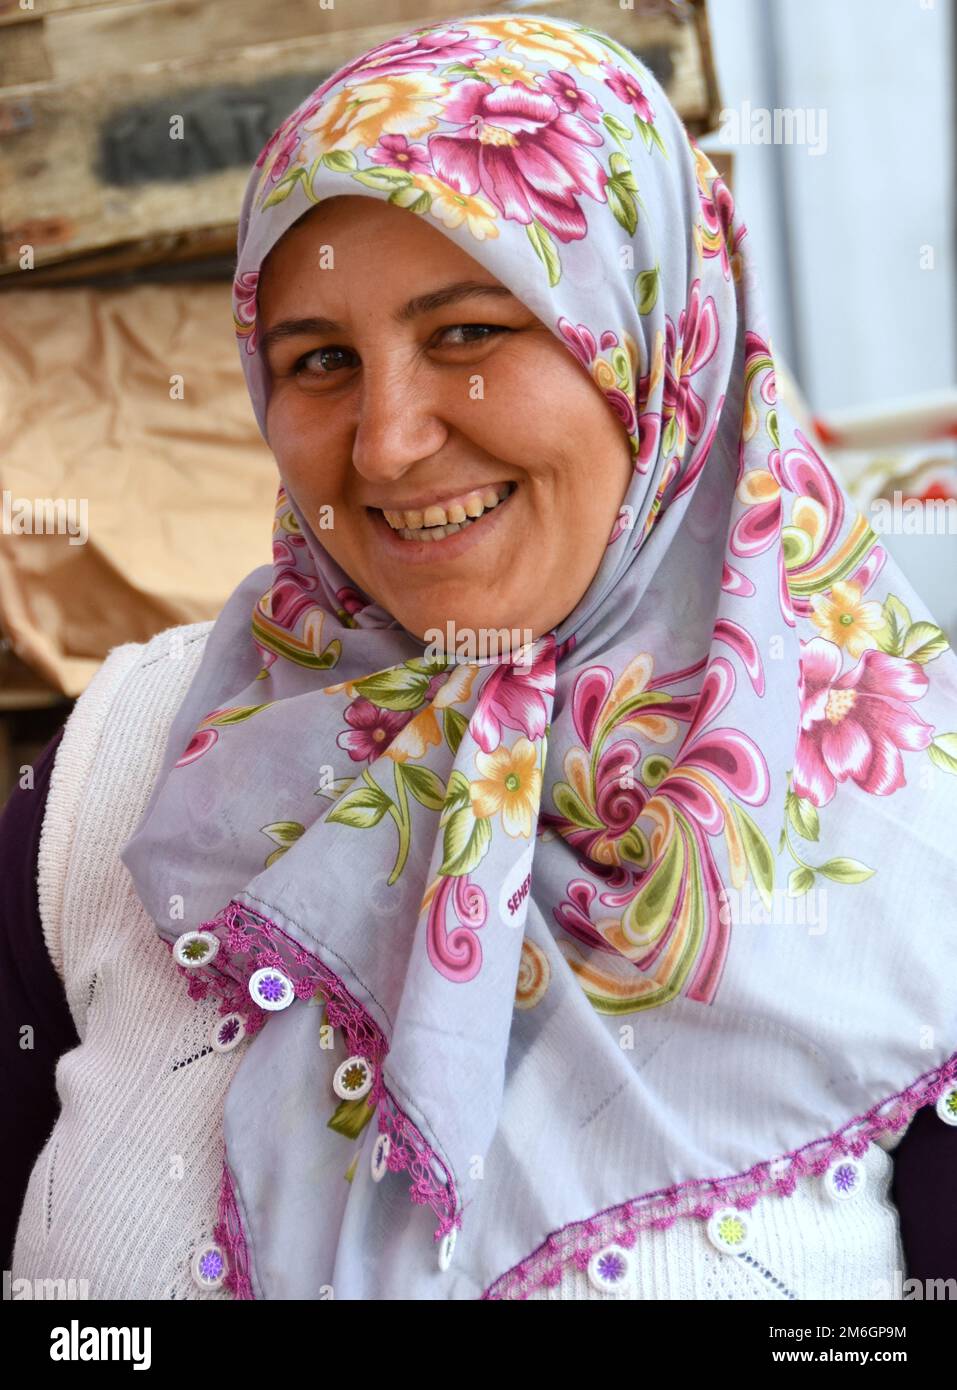 Faces of Turkey: Woman in Floral Head Scarf Stock Photo